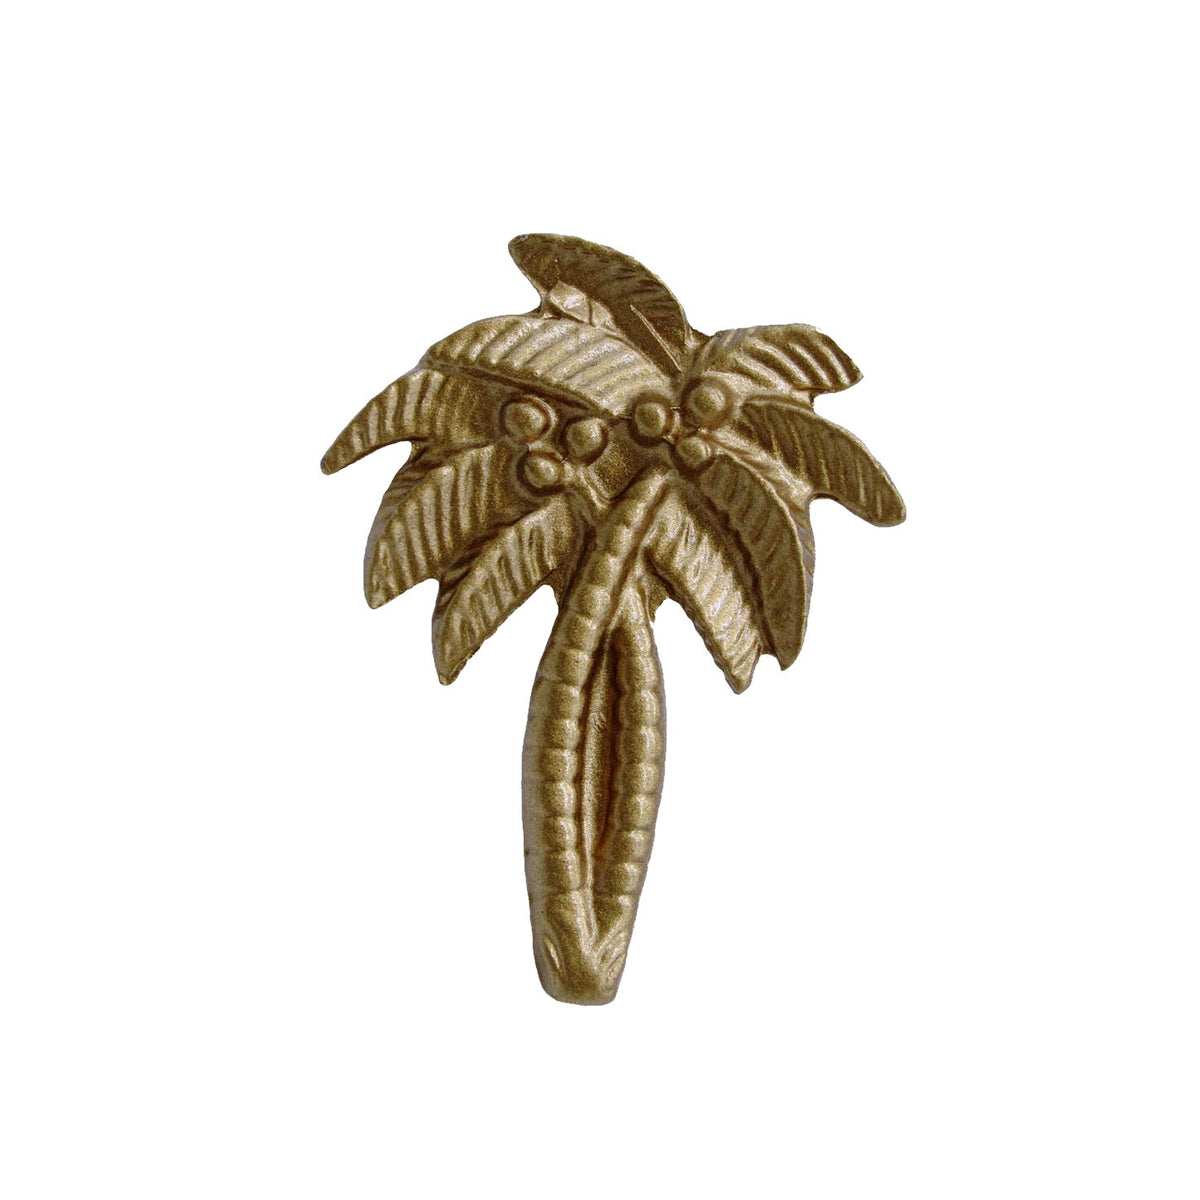 Cabinet_Knobs_-_Rustic_Tropical_Coastal_Palm_Tree_-_Lux_Gold